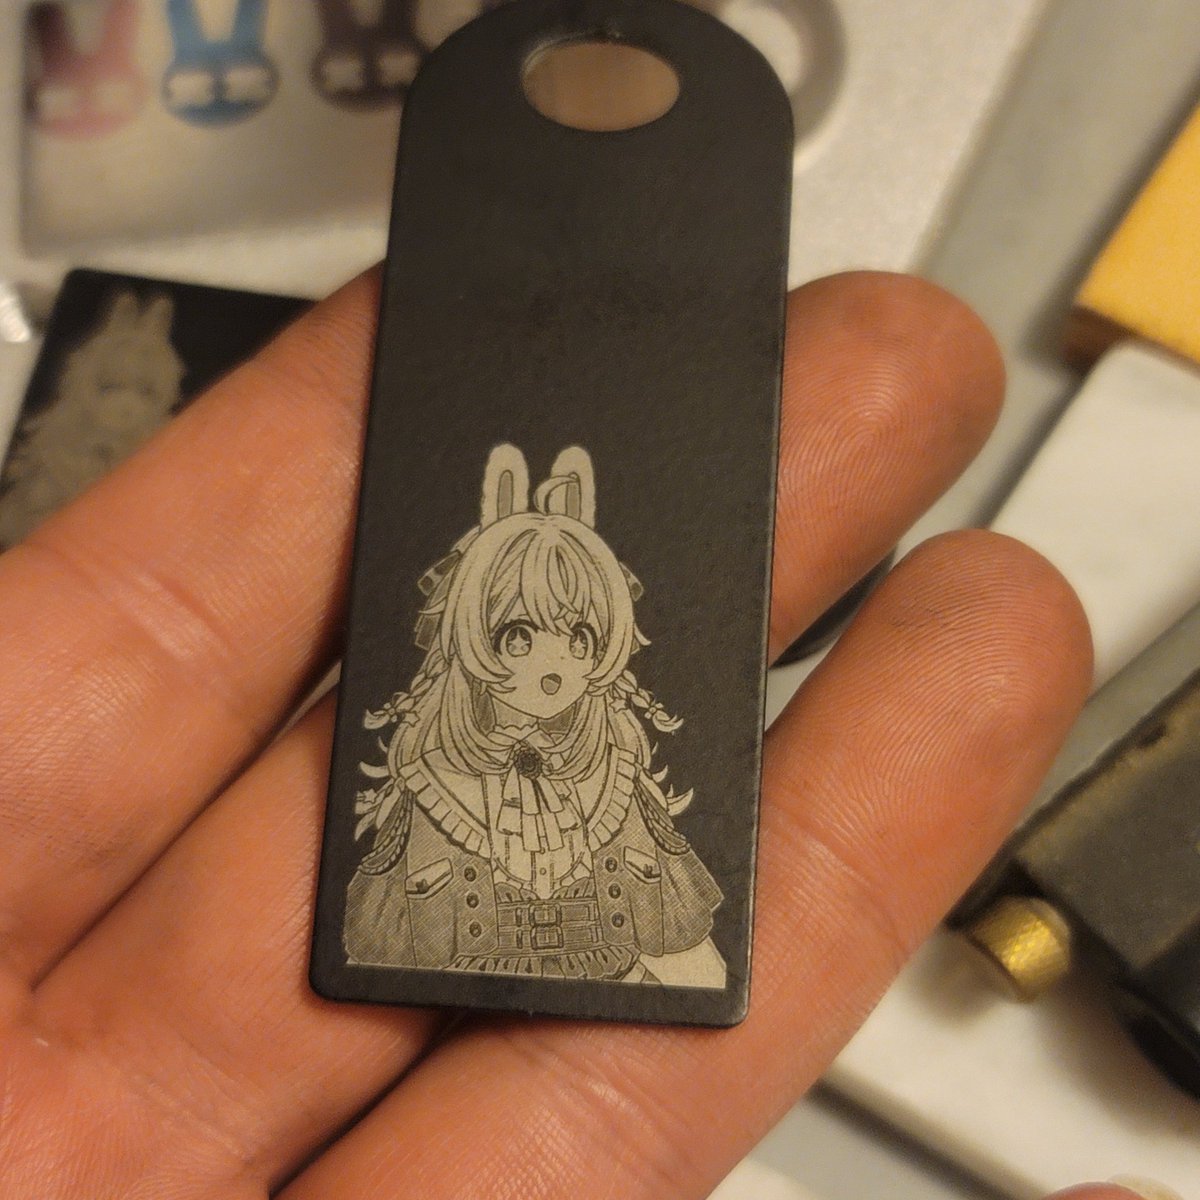 Tonight during the Pippa stream: Pocket Pippa for my keychain. Made of powdercoated stainless steel. Lookin forward to getting some more of these done with different artwork.
.
.
Also been working on stuff for the patreon bros to test out.